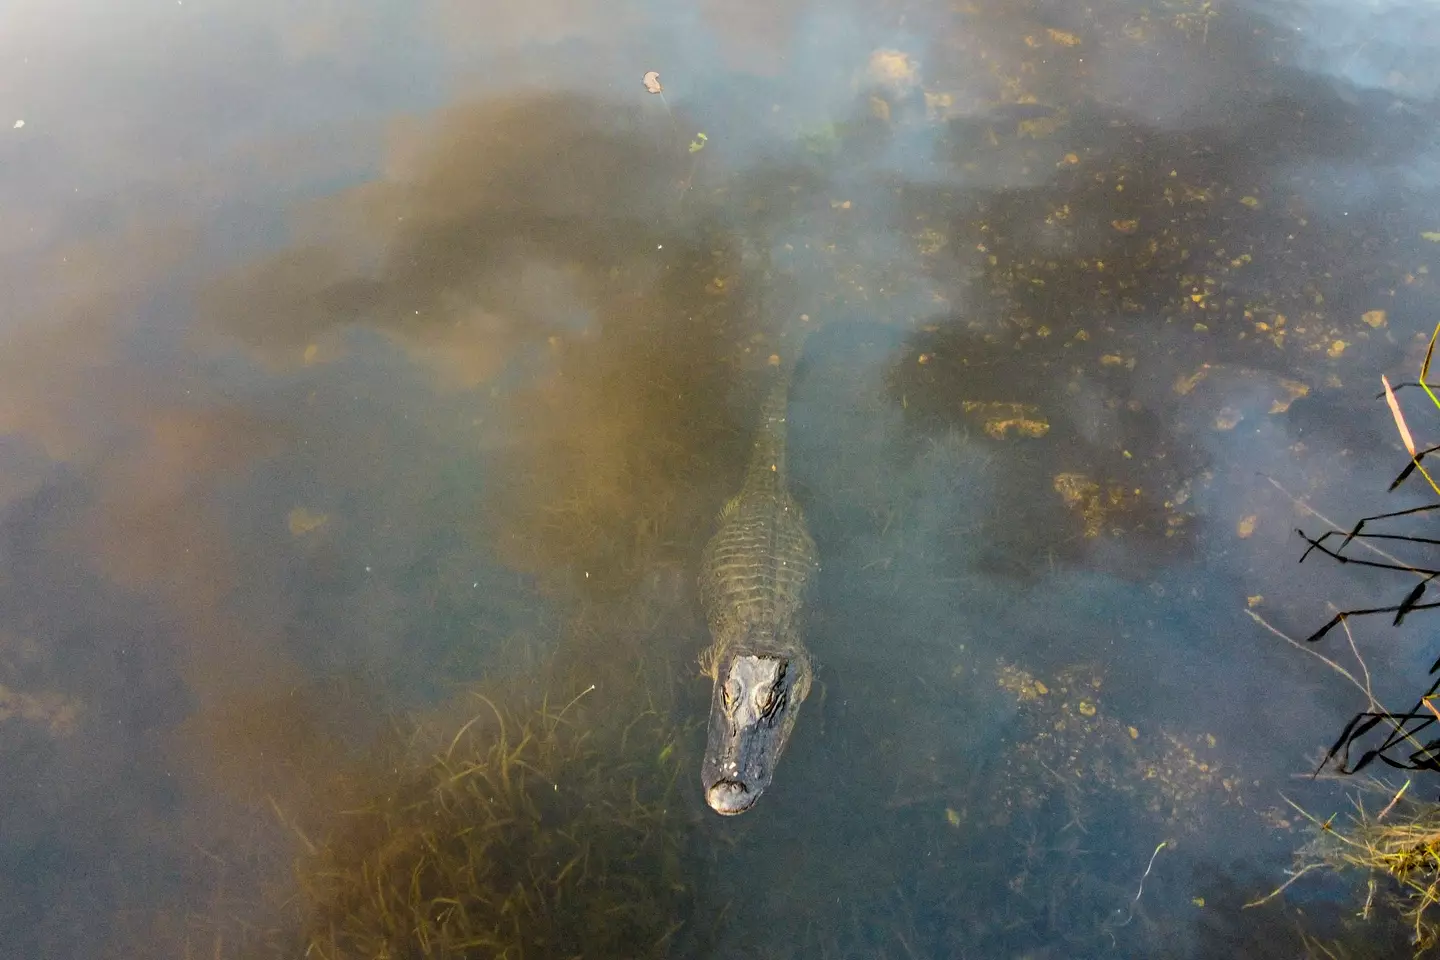 Alligators can even lurk in shallow water. (CHANDAN KHANNA/AFP via Getty Images)